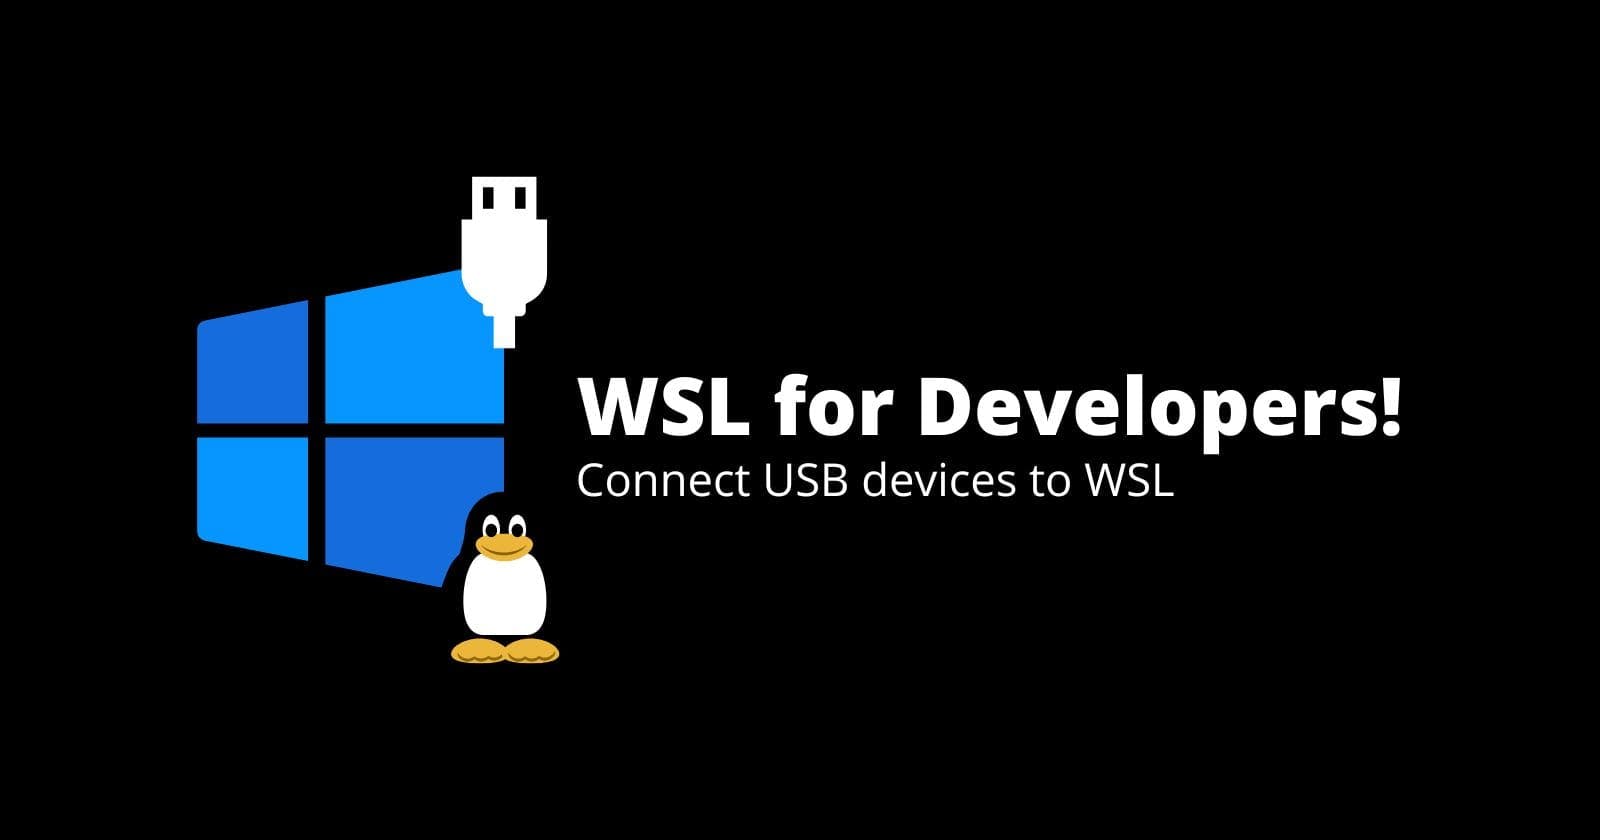 WSL for Developers!: Connect USB devices